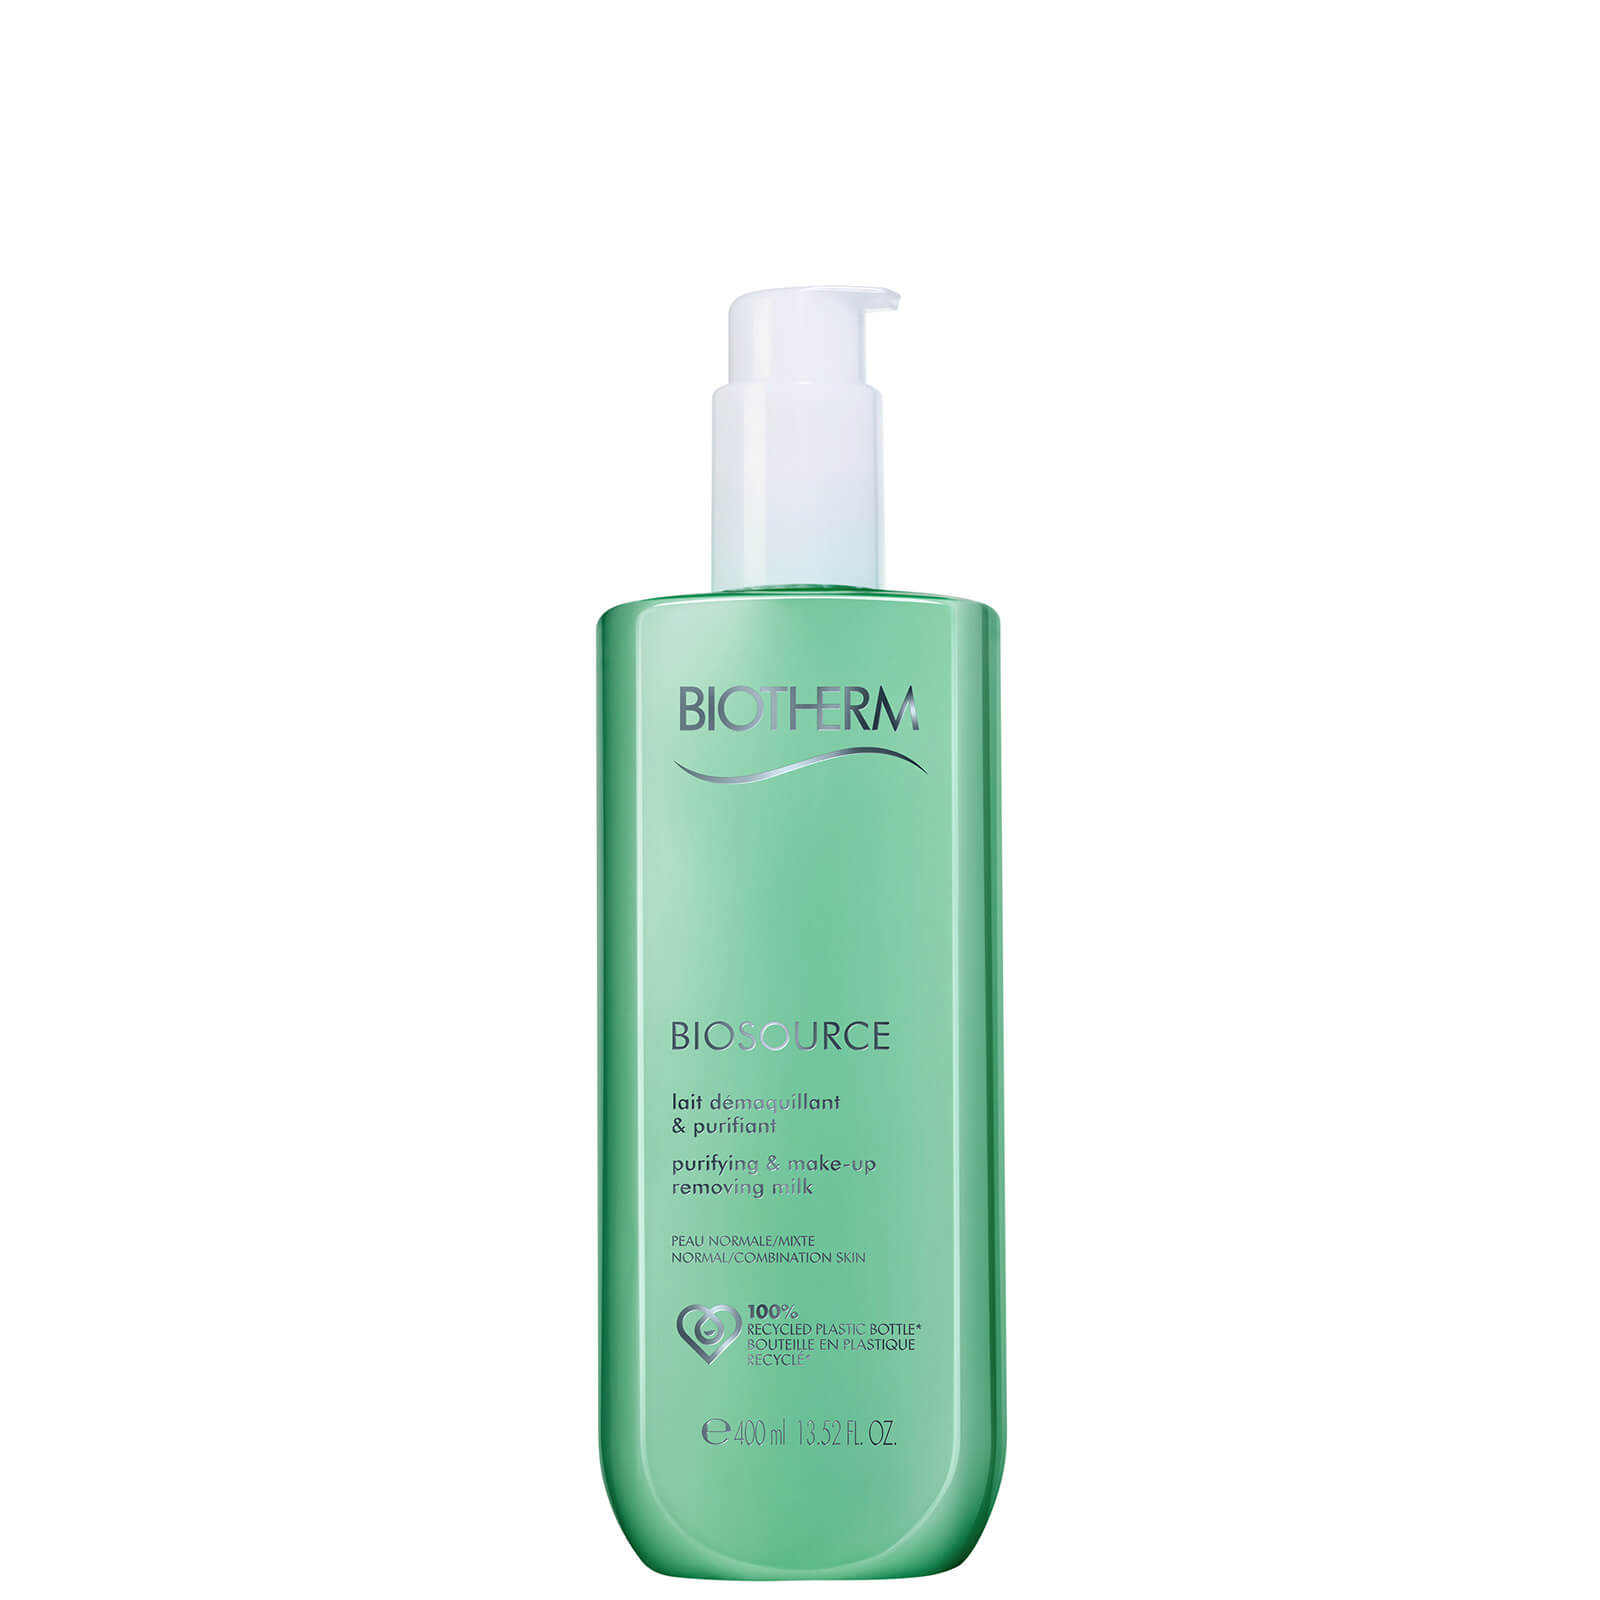 Image of Biotherm Biosource Purifying and Makeup Removing Milk 400ml